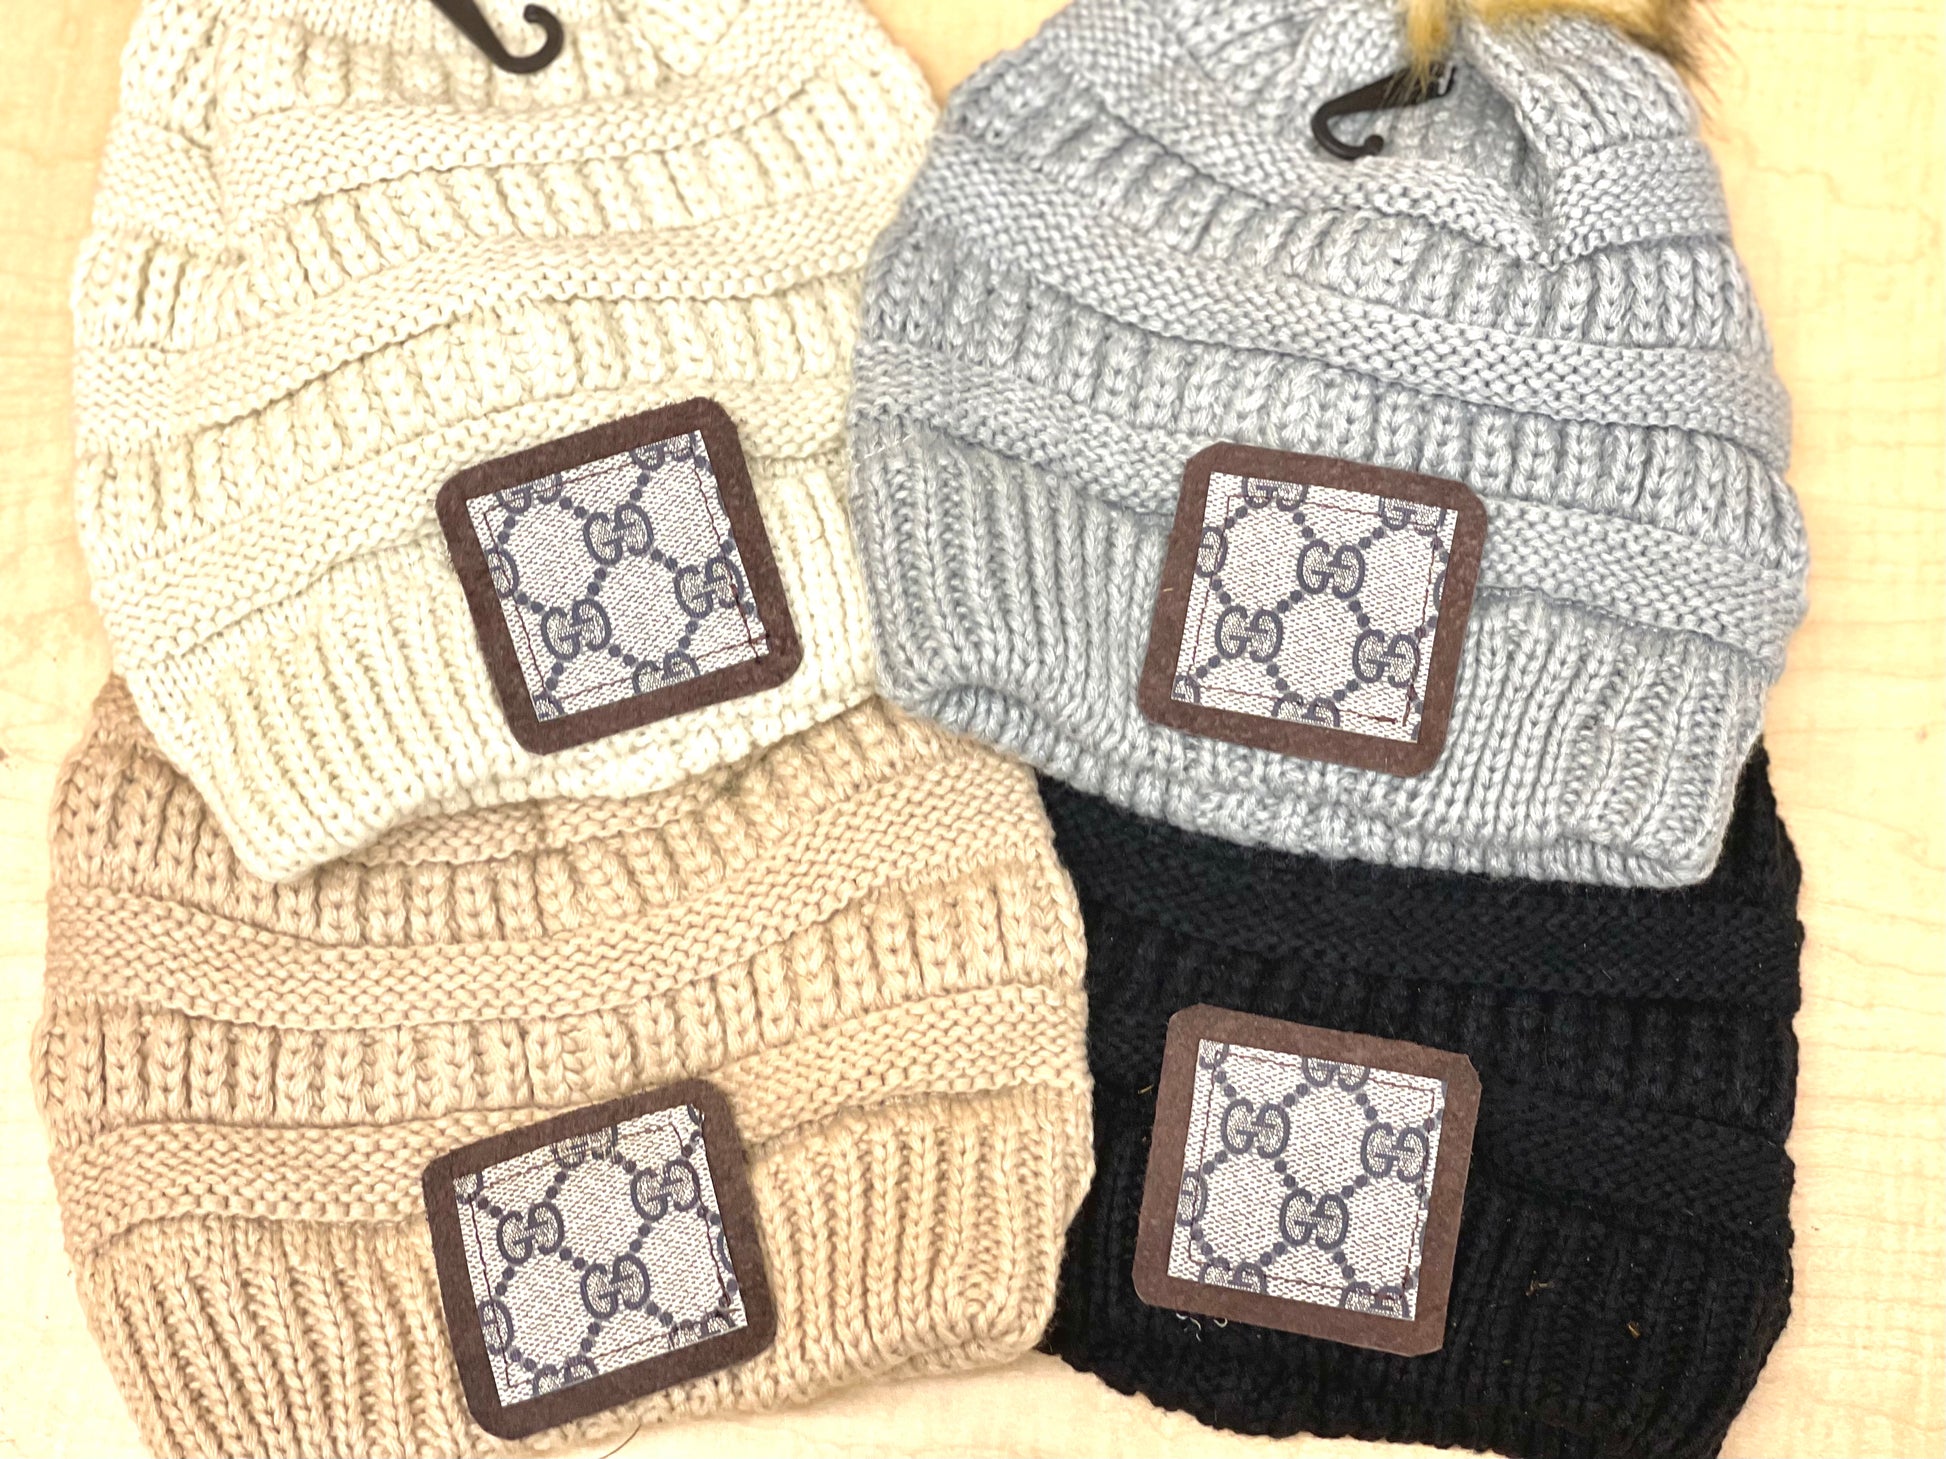 Beanie with Gg patch and antique hardware - Patches Of Upcycling